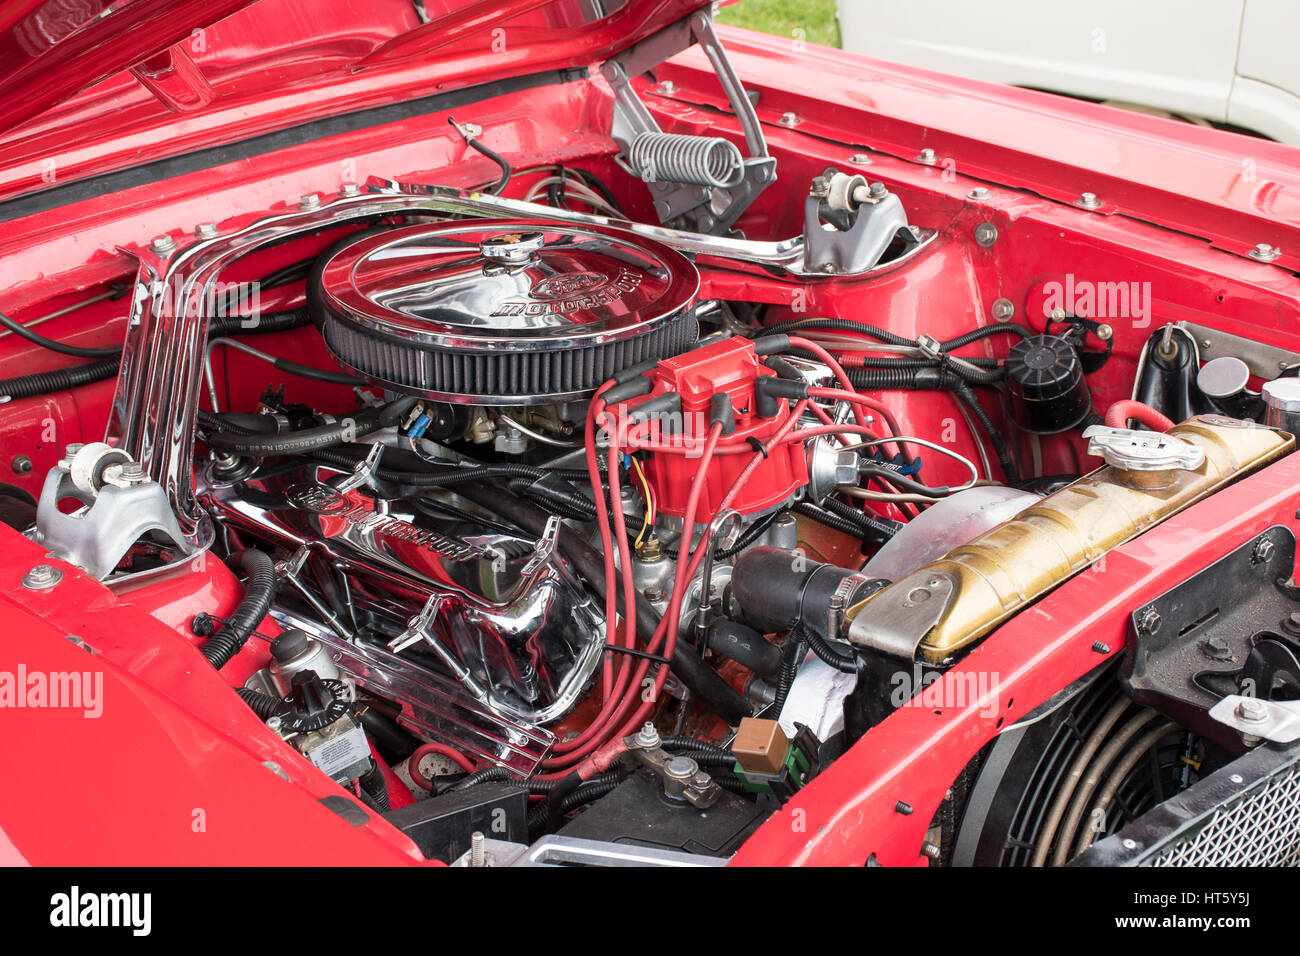 MANCHESTER, UNITED KINGDOM - JULY 11, 2015: 1971 Red Ford Mustang classic car engine. July 2015. Stock Photo